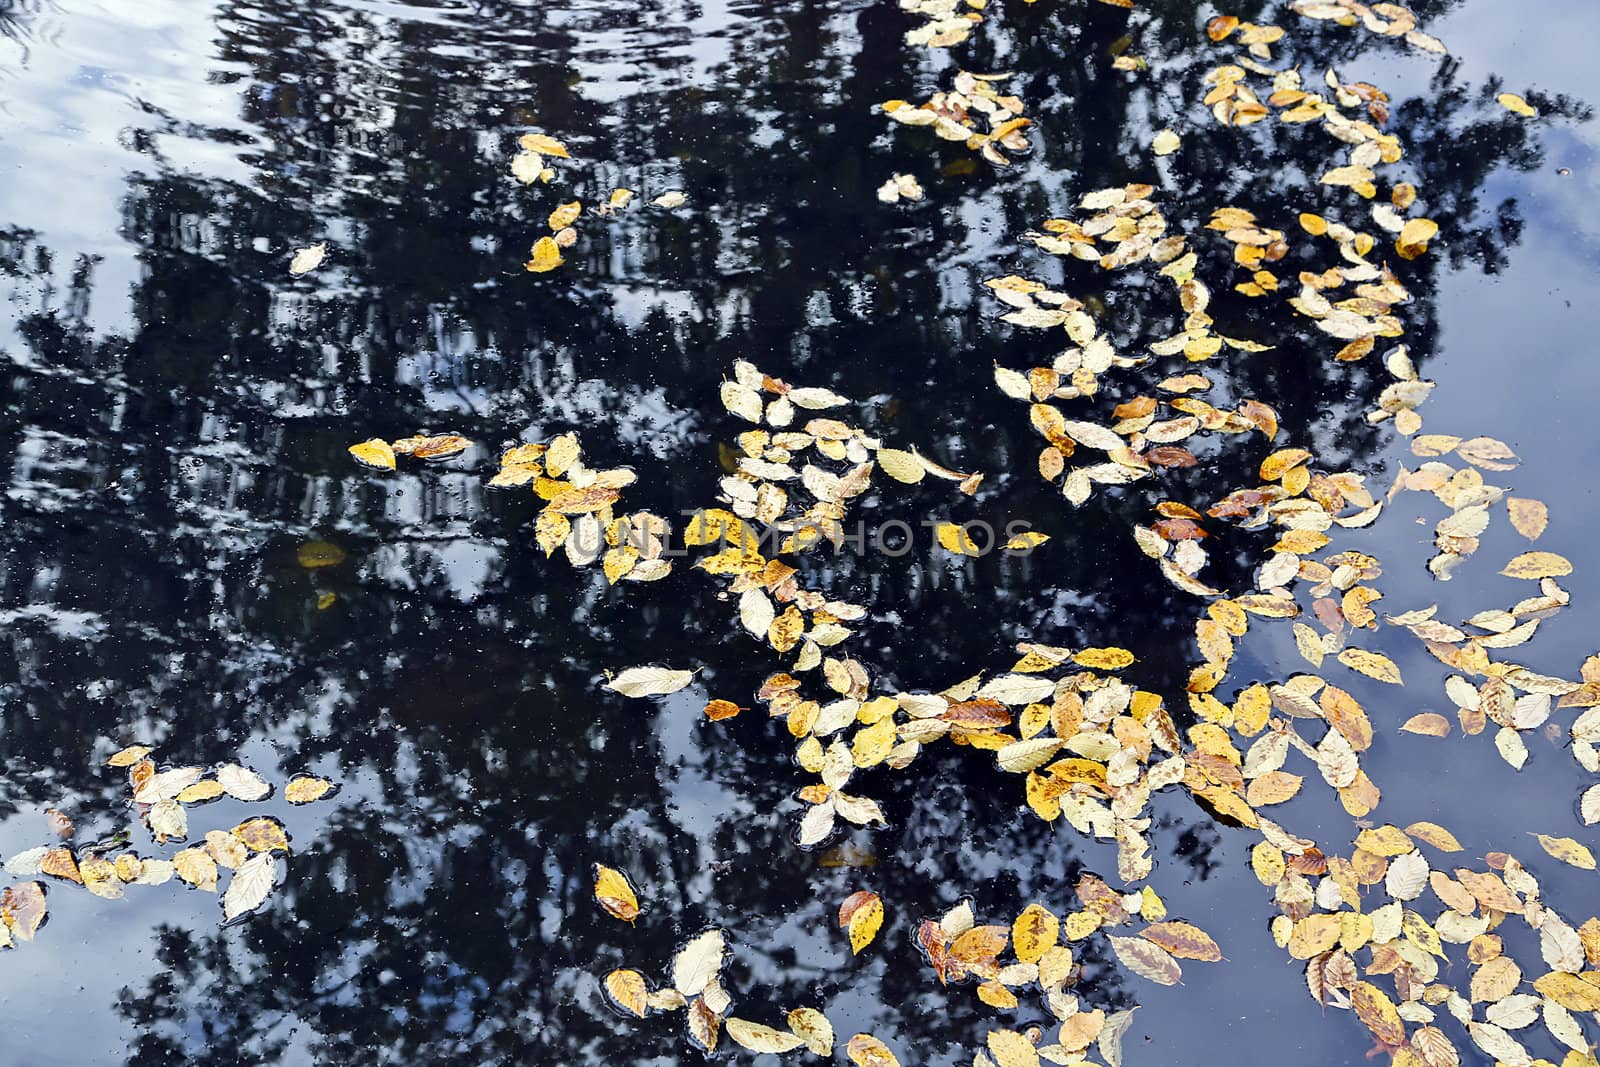 Reflection of a tree on the water surface with autumn leaves